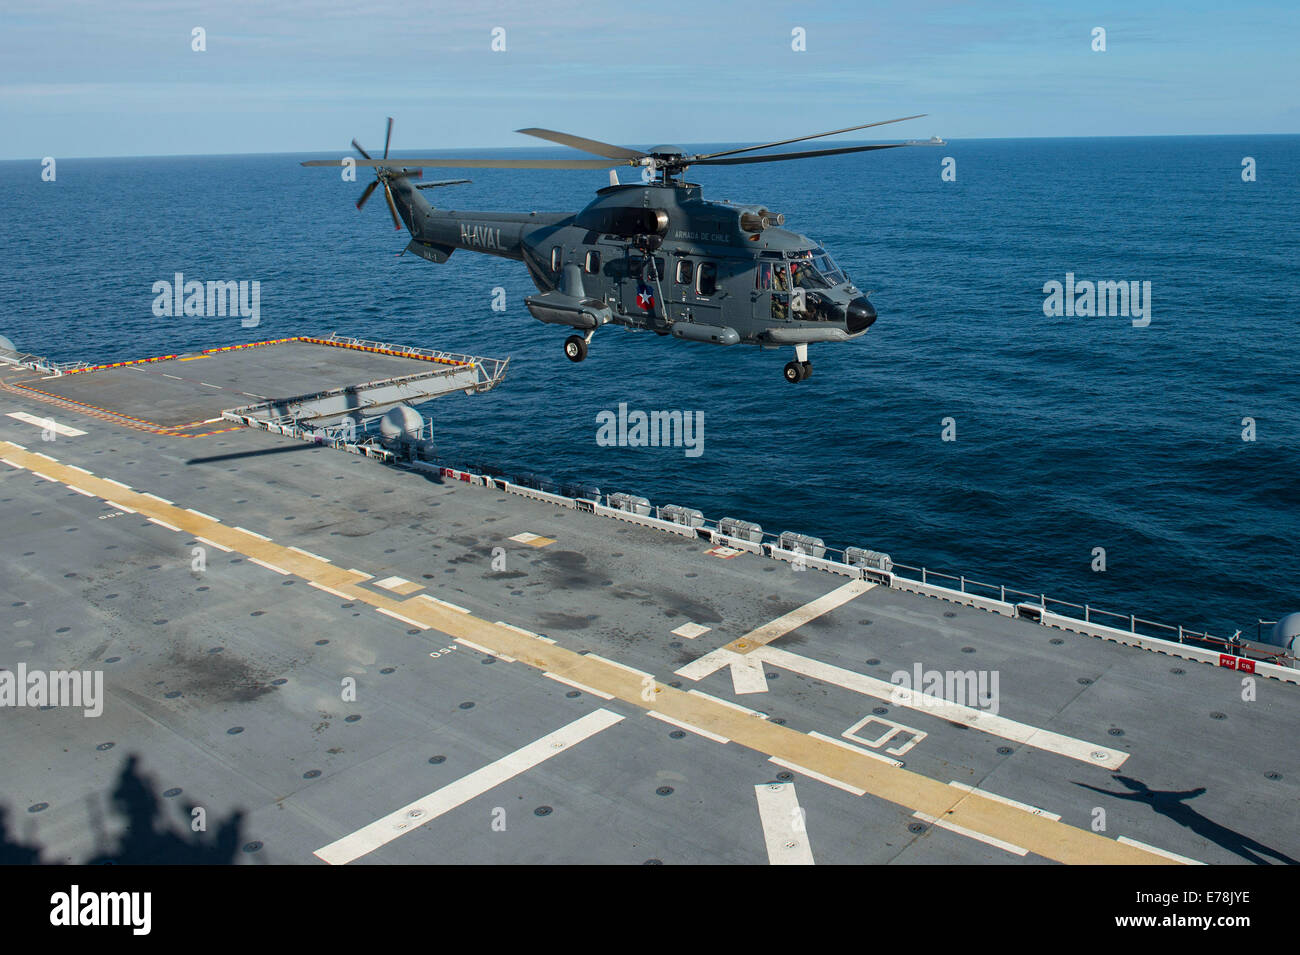 A Chilean Navy helicopter assigned to Helicopter Attack Squadron (HA) 1 prepares to land on the flight deck of the amphibious assault ship USS America (LHA 6) during a bilateral exercise in the Pacific Ocean Aug. 27, 2014. The America embarked on a missio Stock Photo